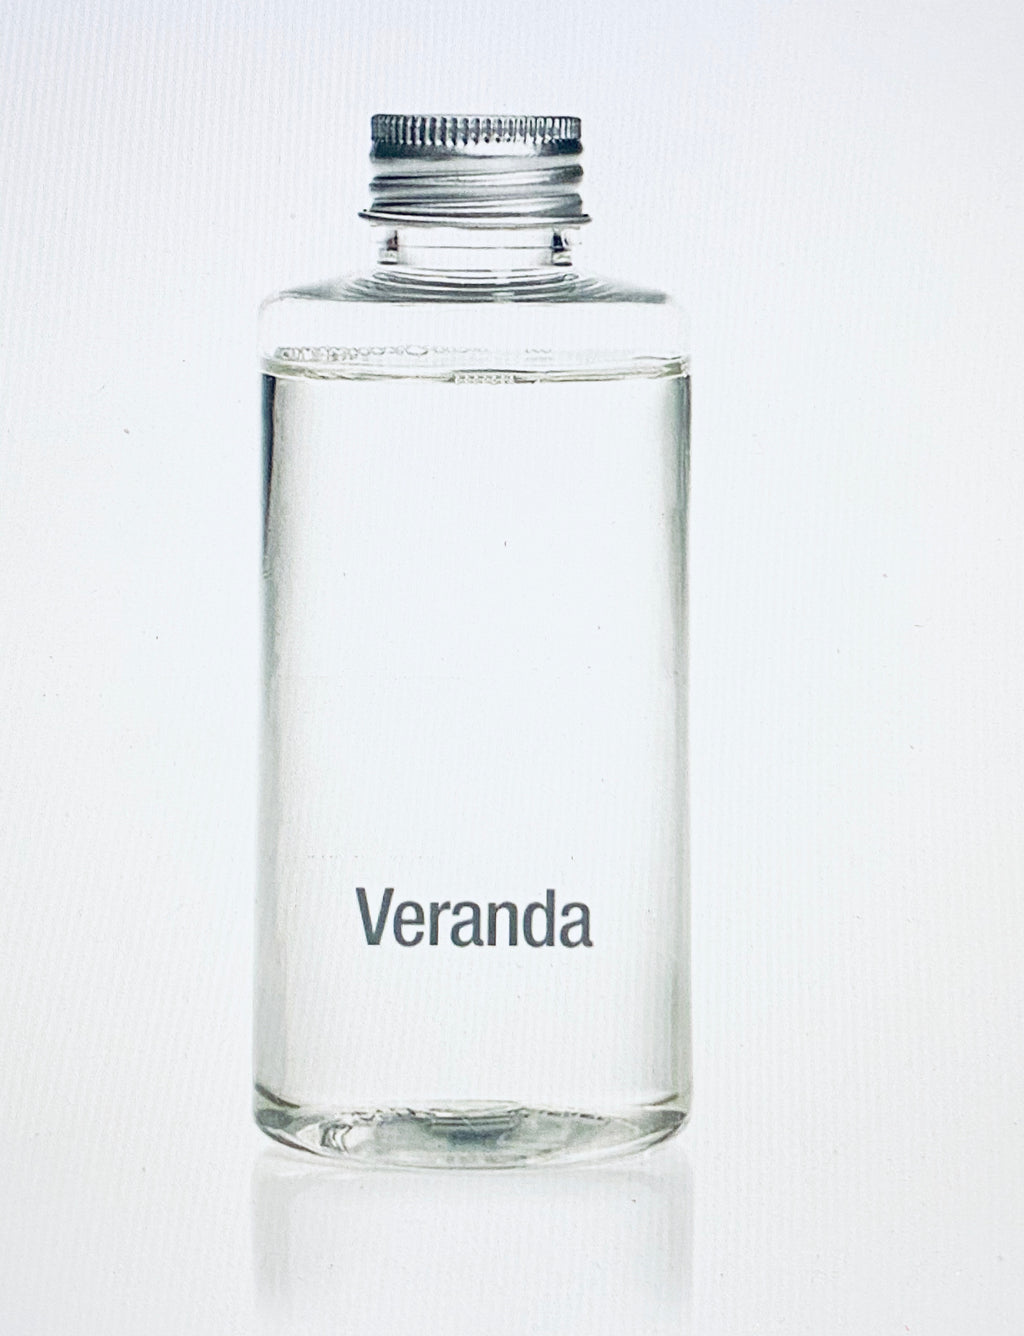 Veranda French Gardenia Porcelain Diffuser Refill product image features a 100ml clear glass bottle filled with french gardenia oil fragrance.  Veranda line of home fragrances in Zodax brand.  The fragrance top notes are fresh bergamot and watery bamboo.  The middle notes are french gardenia, white tuberous and star jasmine.  The base notes are creamy sandalwood, white amber and exotic musk.  Aroma is clean, soft and floral.